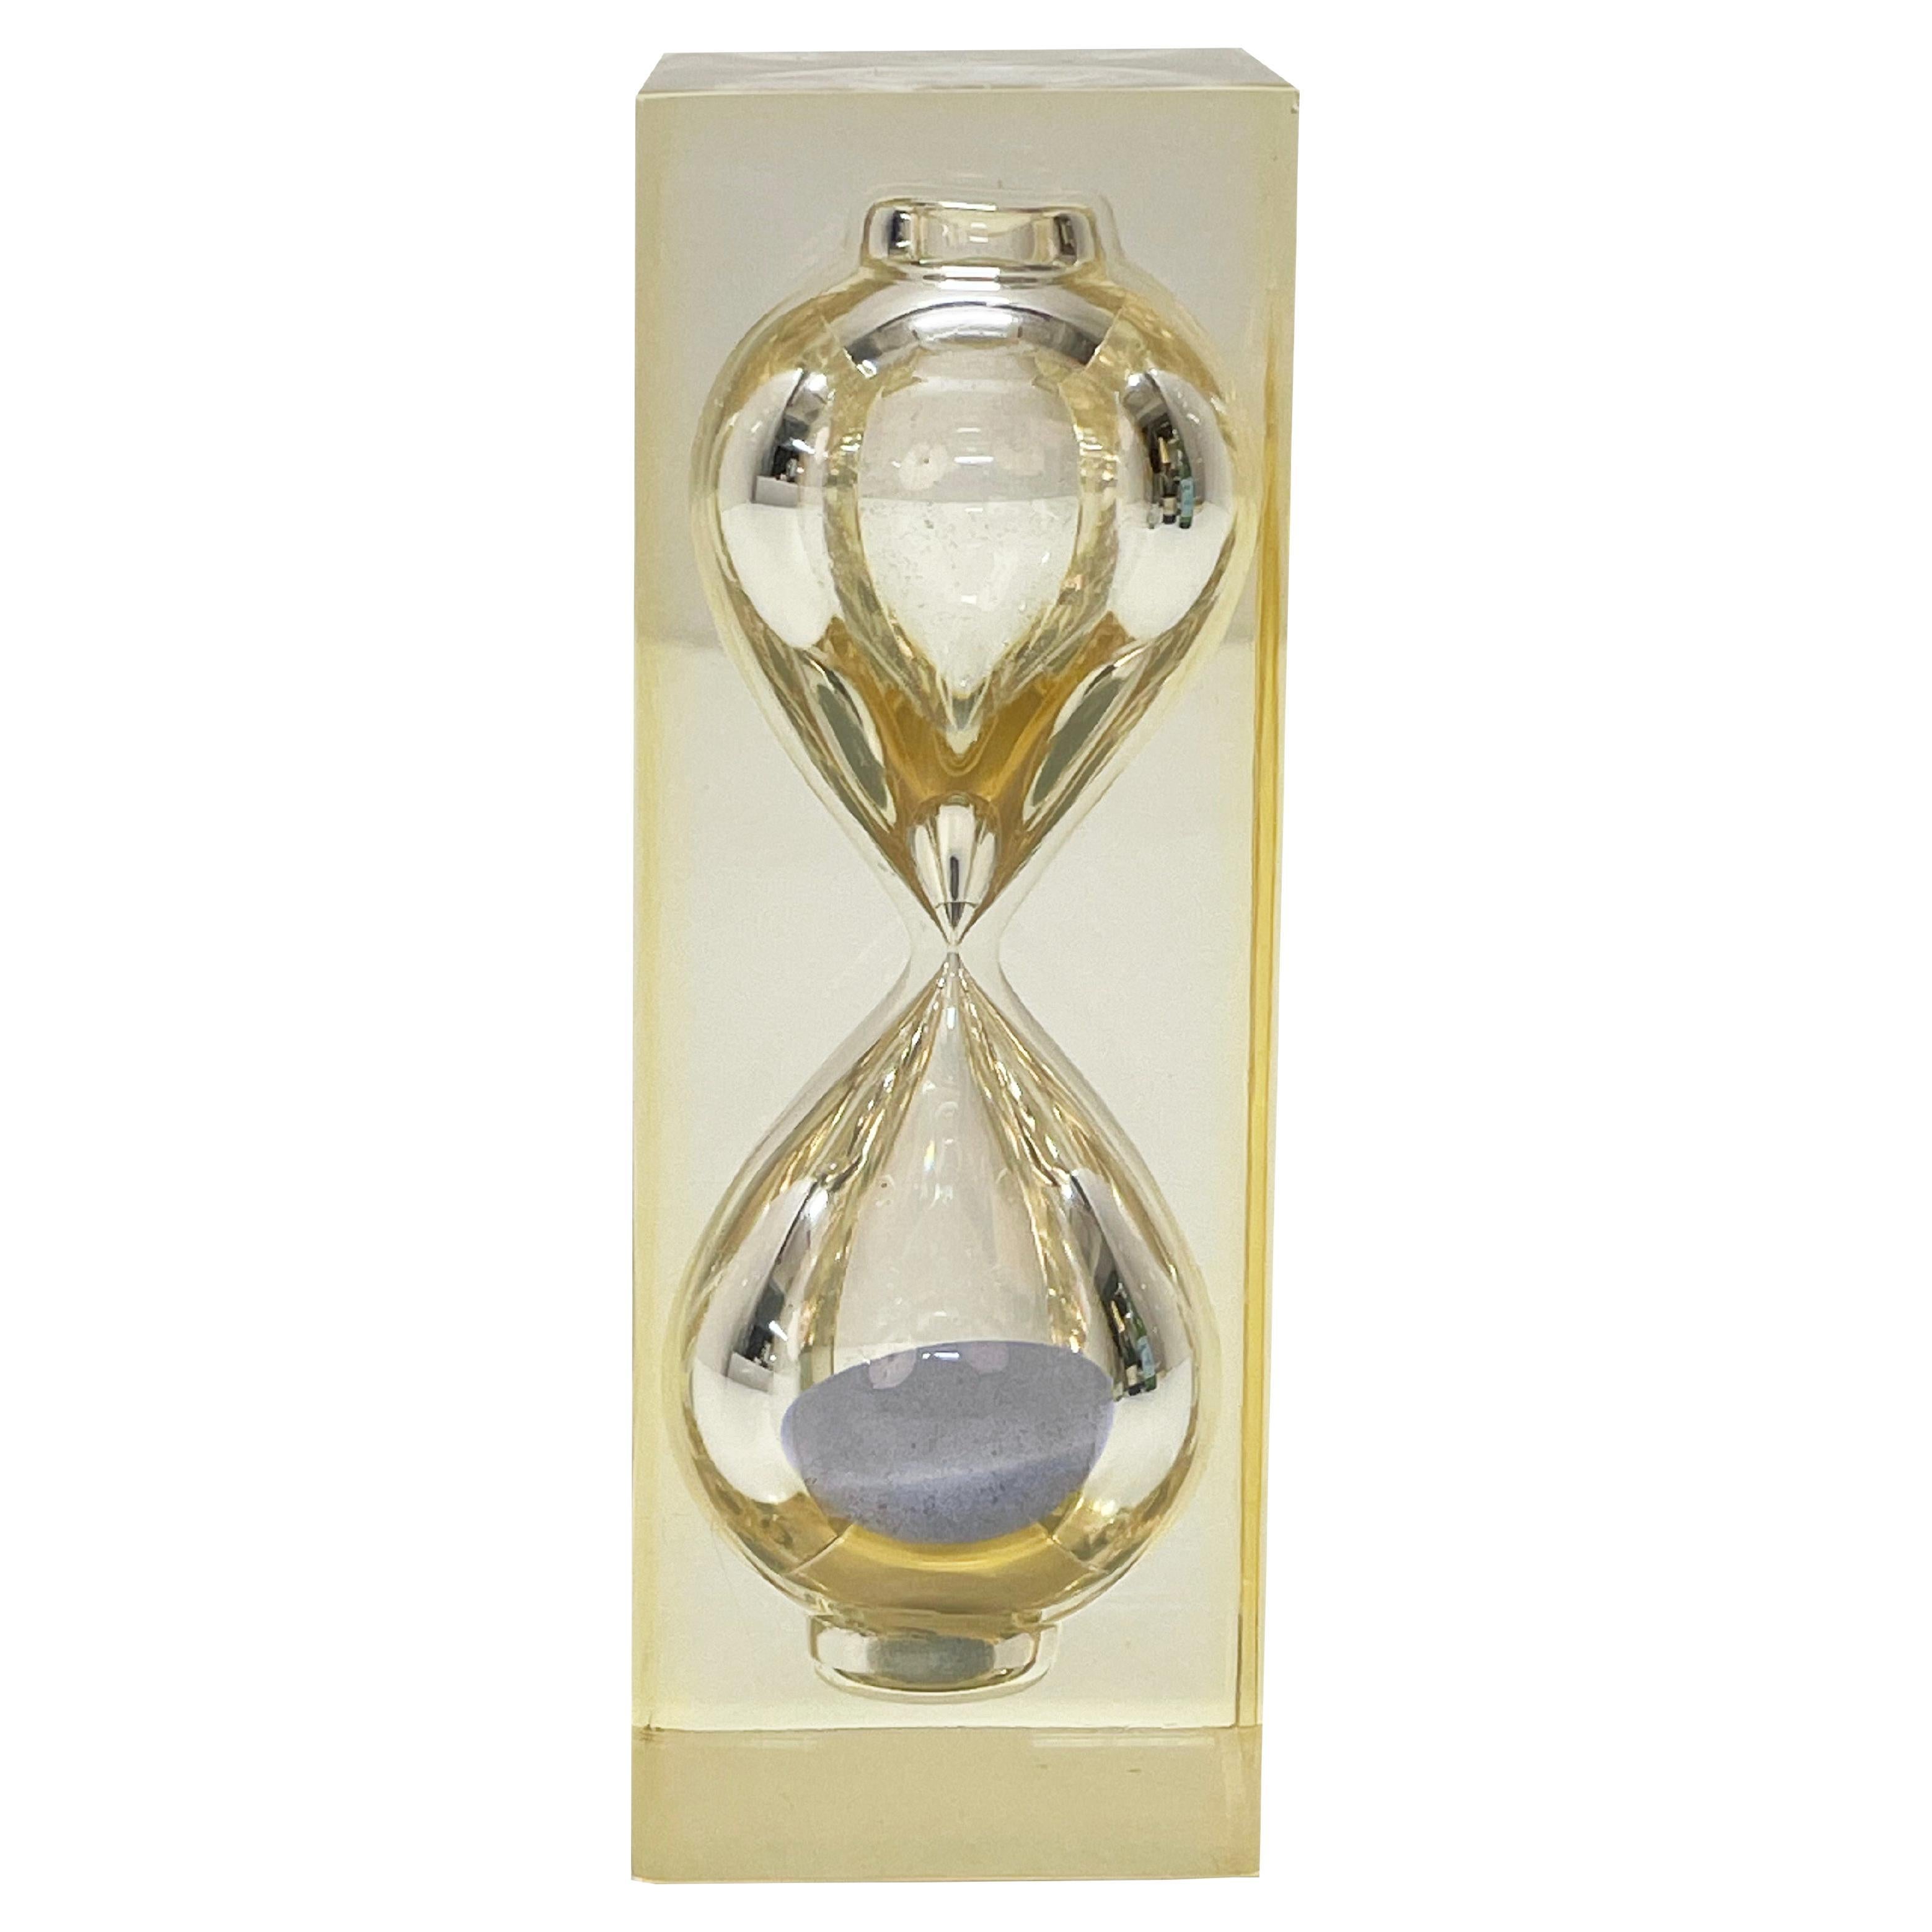 Amazing midcentury hourglass in bubble lucite with straight external lines. This fantastic item was produced in Italy during the 1970s in the manner of Charles Hollis Jones. 

The 15-minute sand timer works perfectly and adds functionality to a